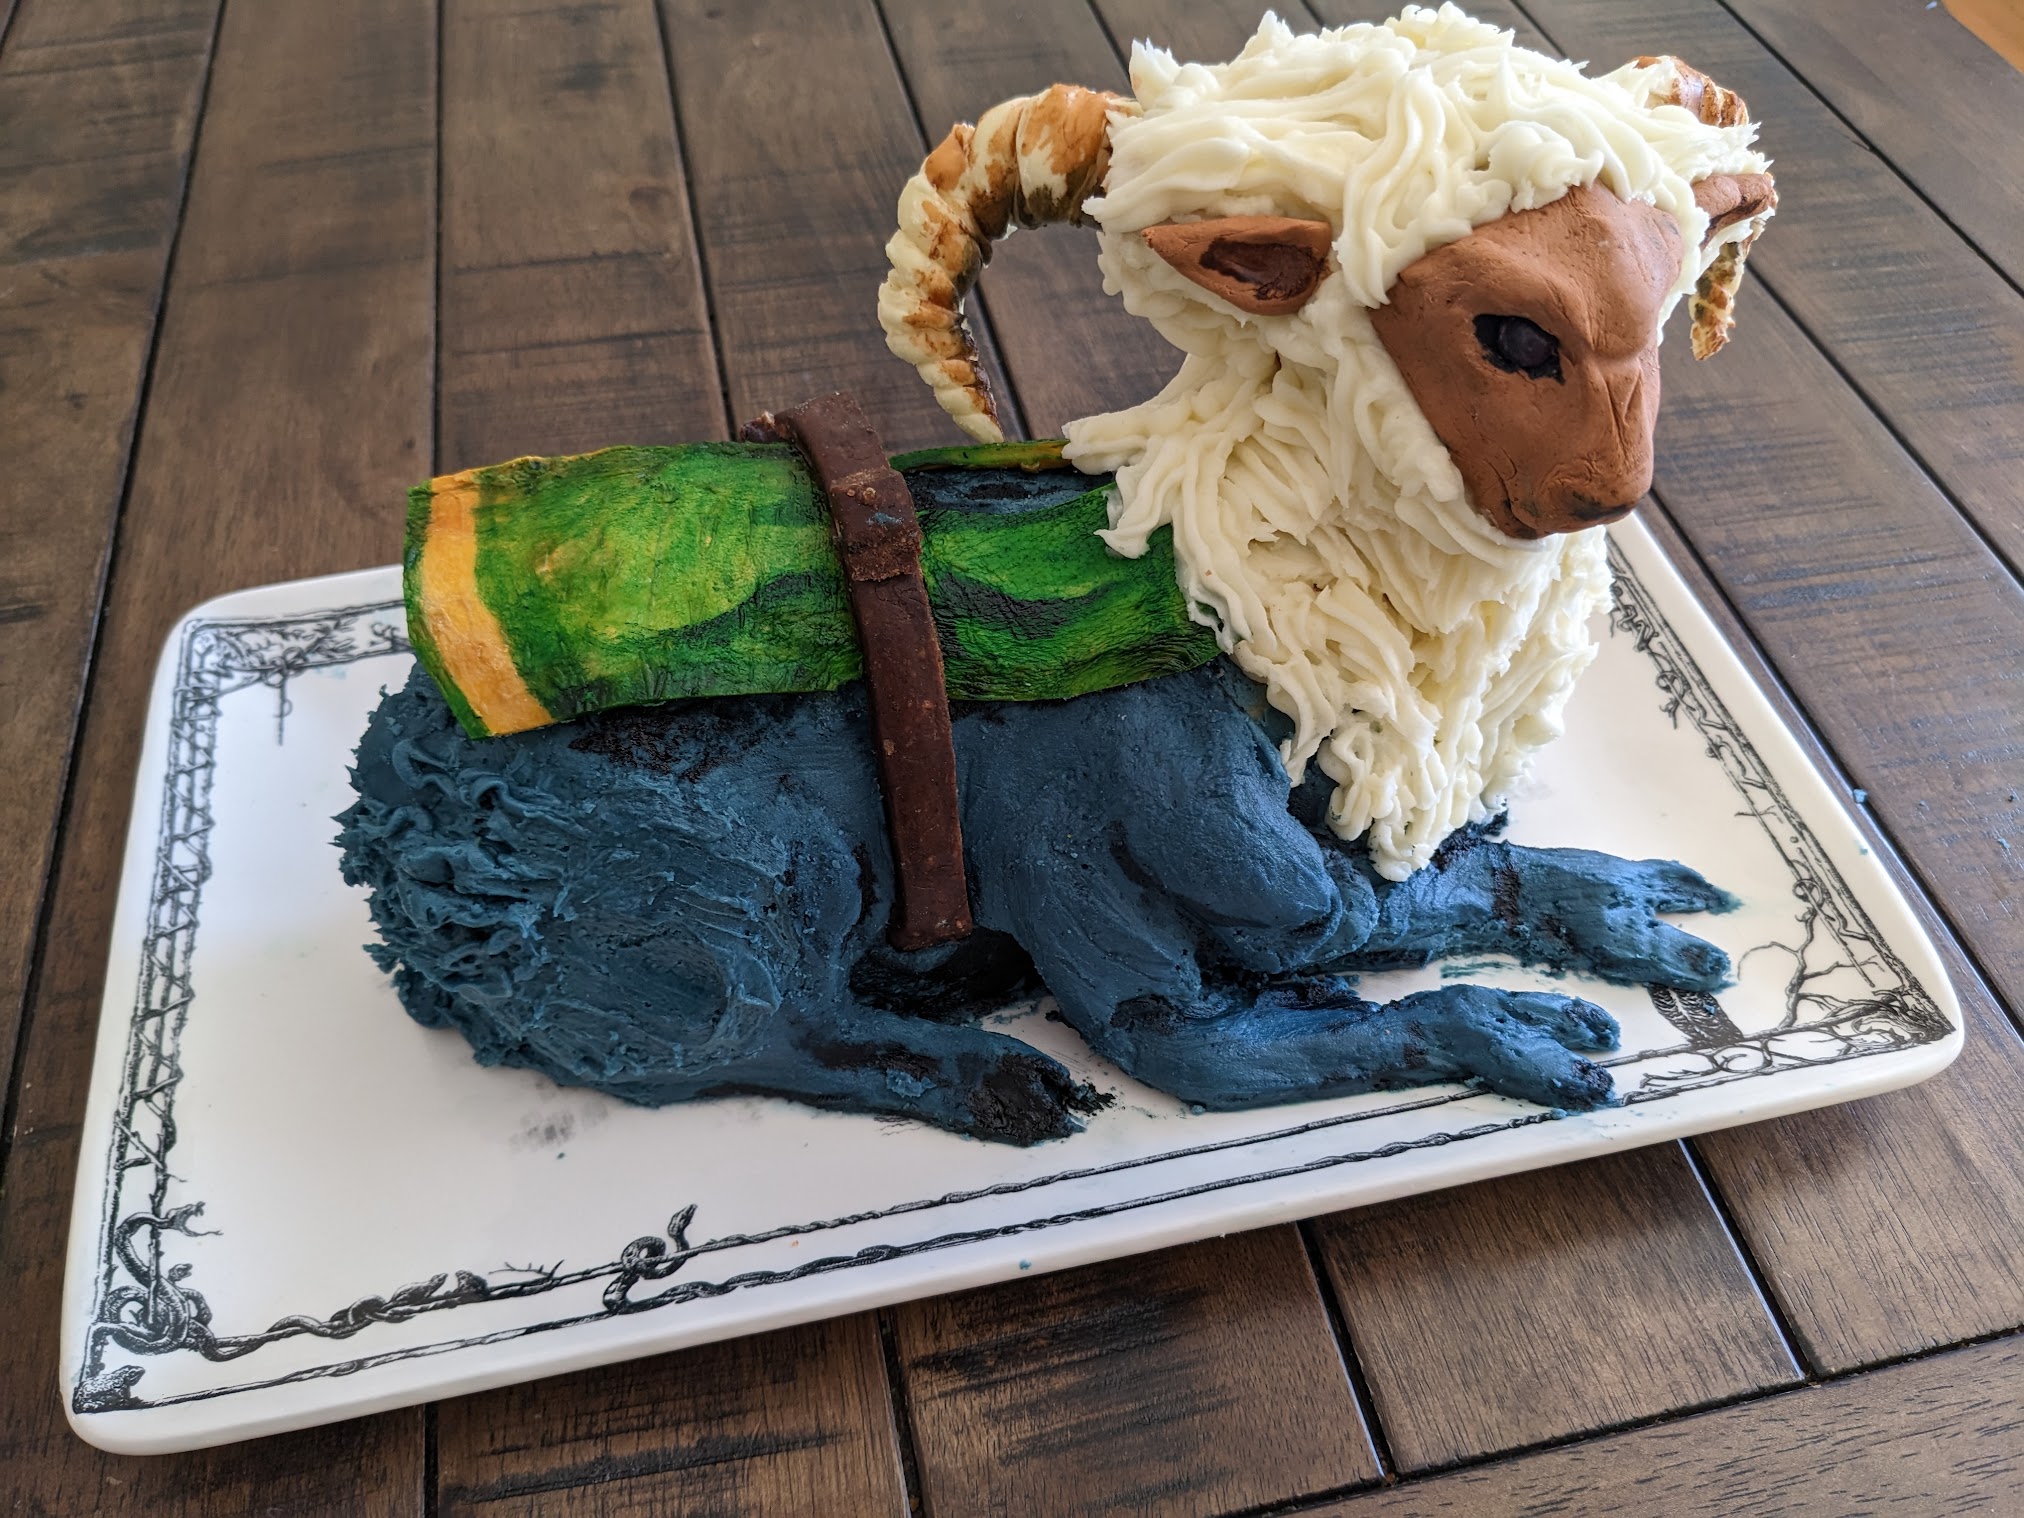 A cake in the shape of Belias, rather obviously baked in an easter lamb cake pan.